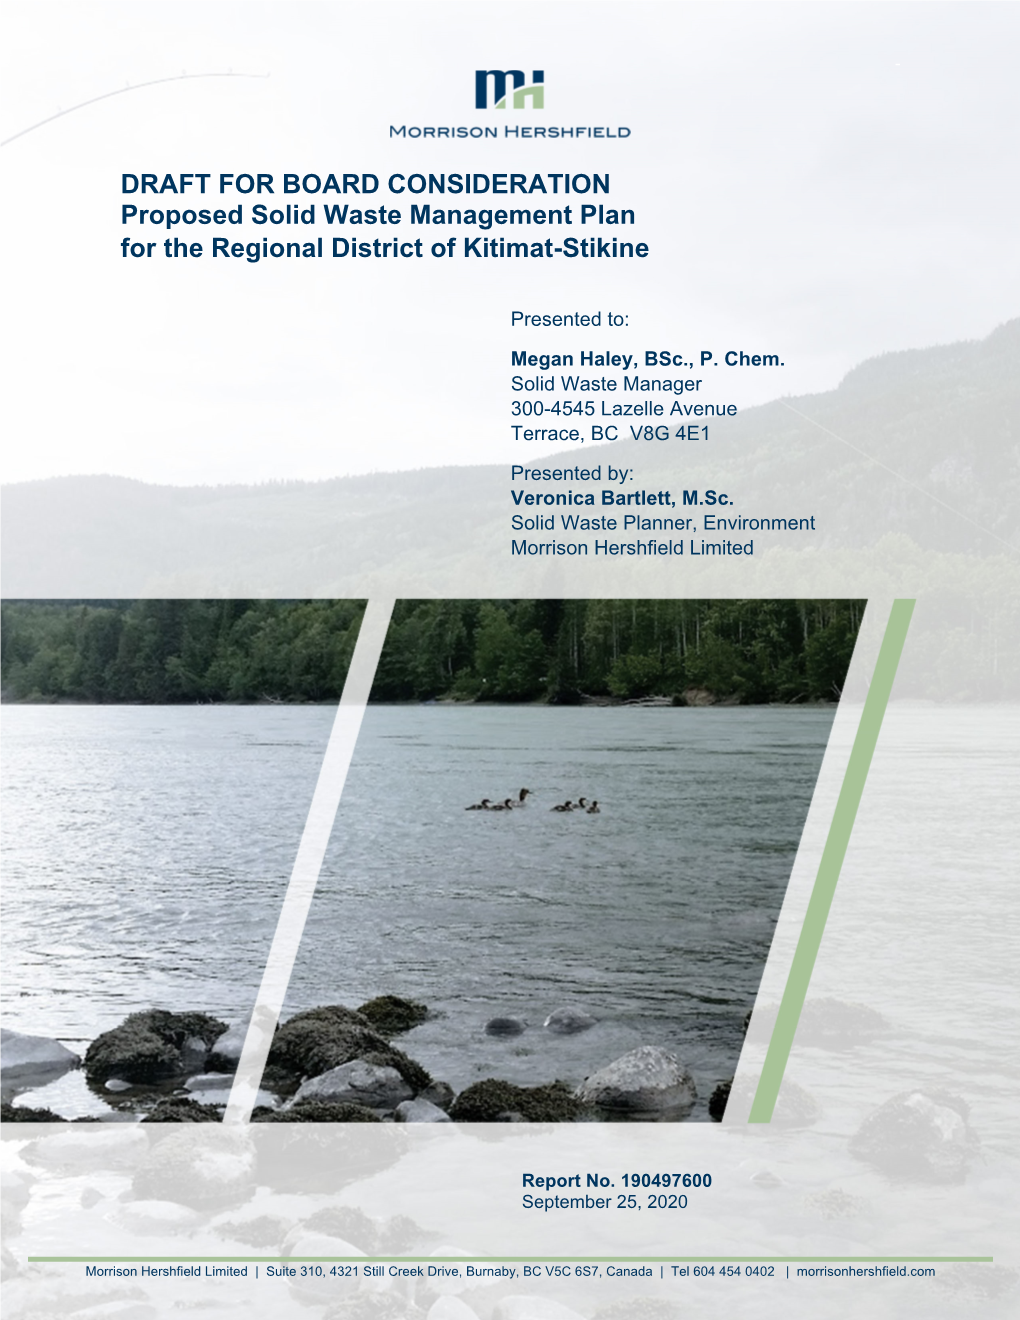 DRAFT for BOARD CONSIDERATION Proposed Solid Waste Management Plan for the Regional District of Kitimat-Stikine